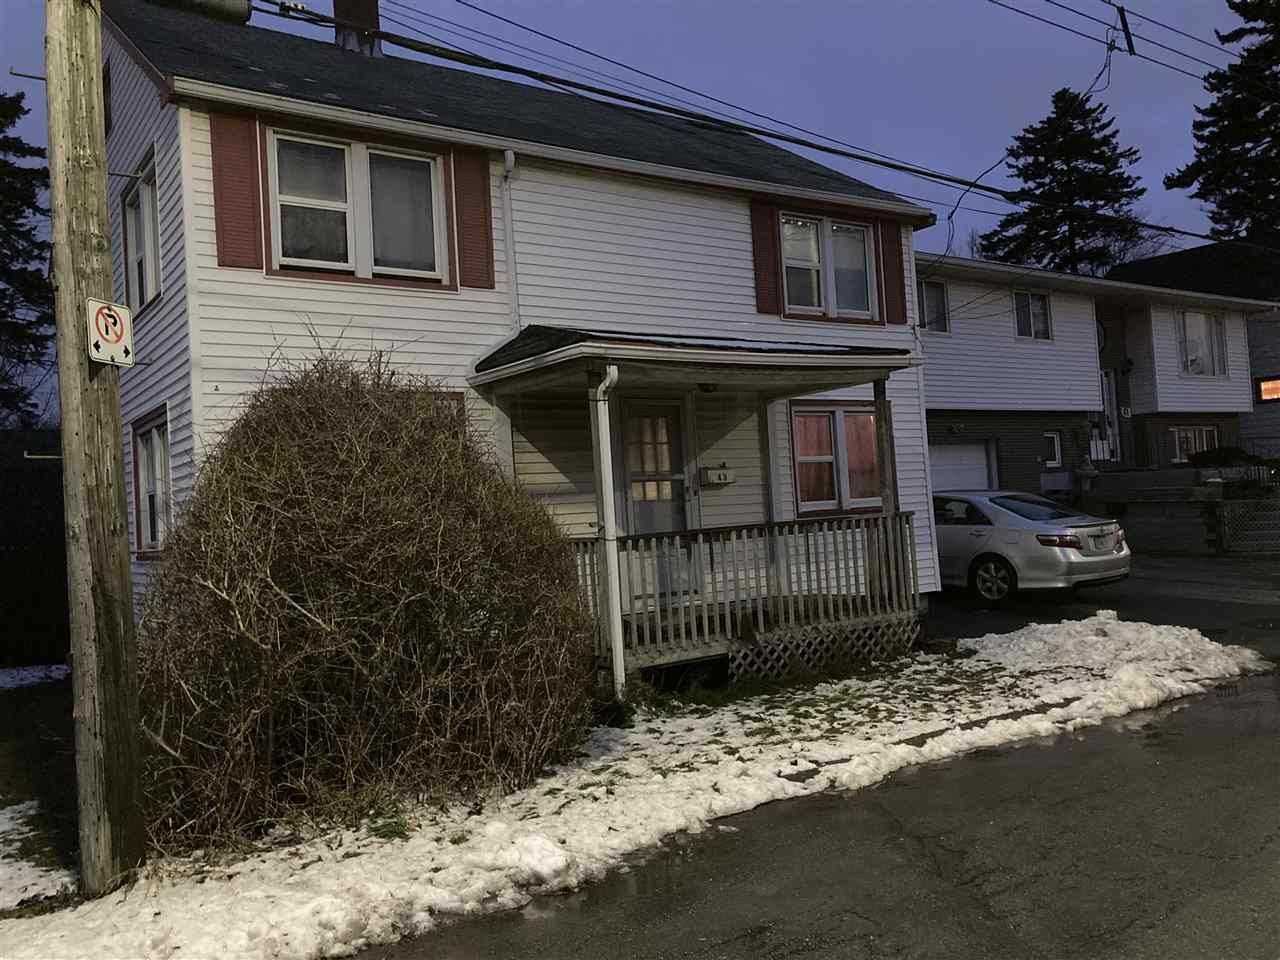 Main Photo: 43 School Avenue in Fairview: 6-Fairview Residential for sale (Halifax-Dartmouth)  : MLS®# 202100164